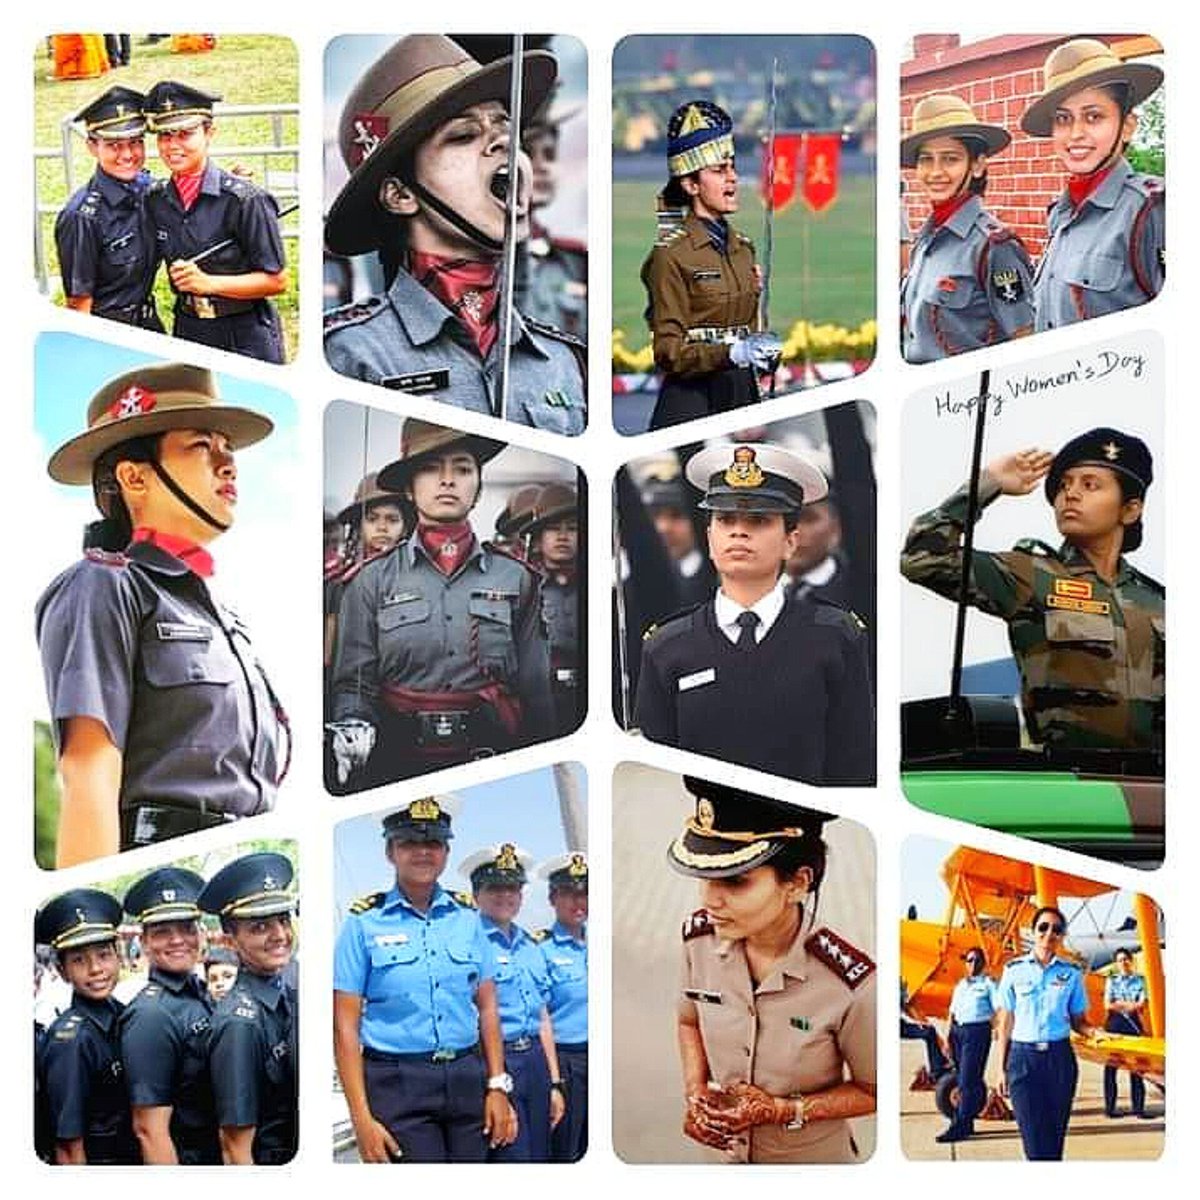 #HappyWomensDay

'Women who are serving our country deserve equal respect as men do. This International Women's Day let salute to their spirit.'

Jai Hind 🇮🇳🙏

#knowyourheroes
#Womensoldiers